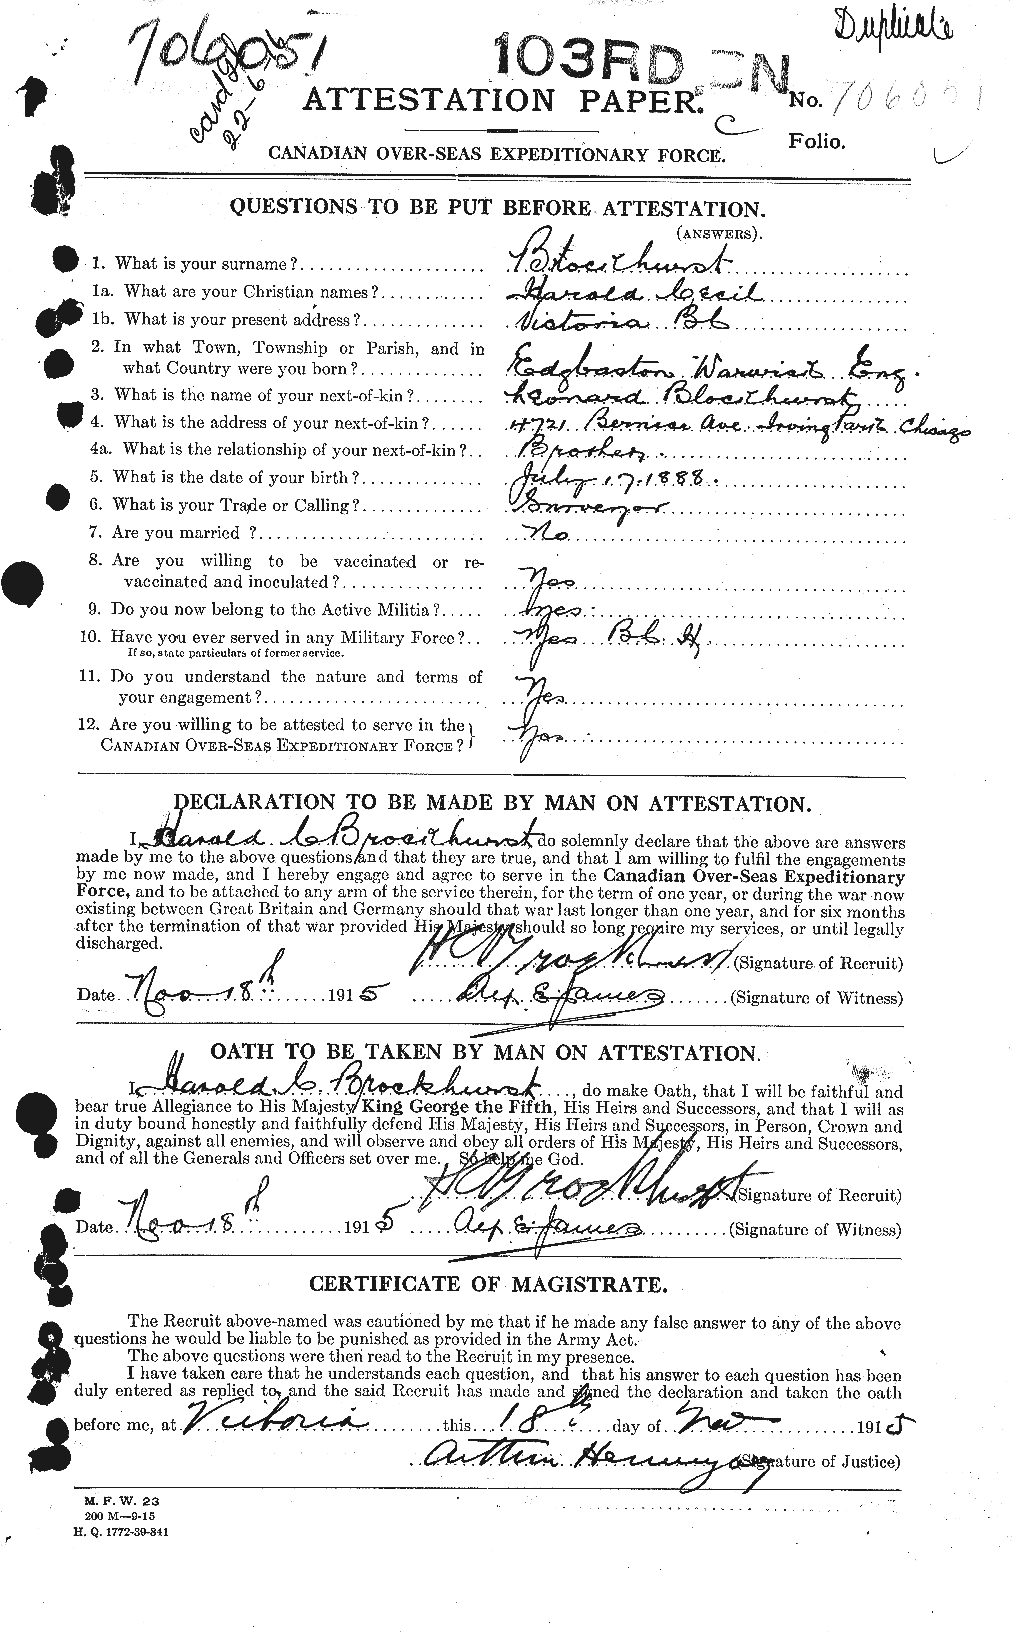 Personnel Records of the First World War - CEF 260907a